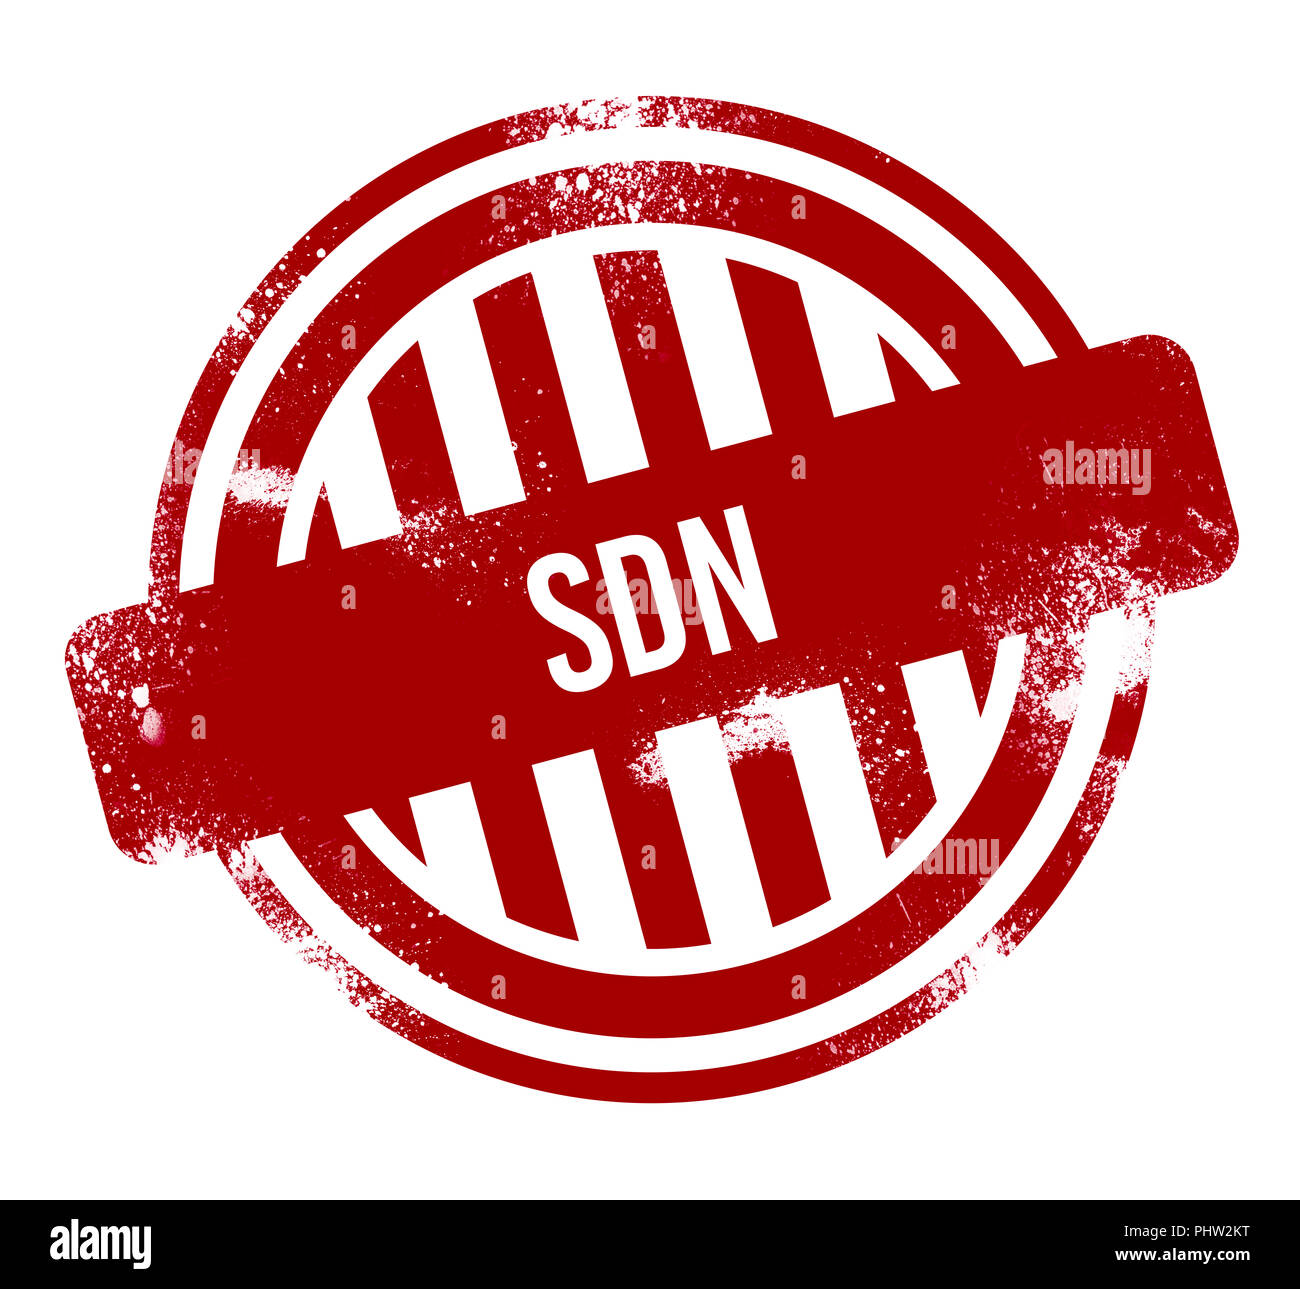 SDN - red grunge button, stamp Stock Photo